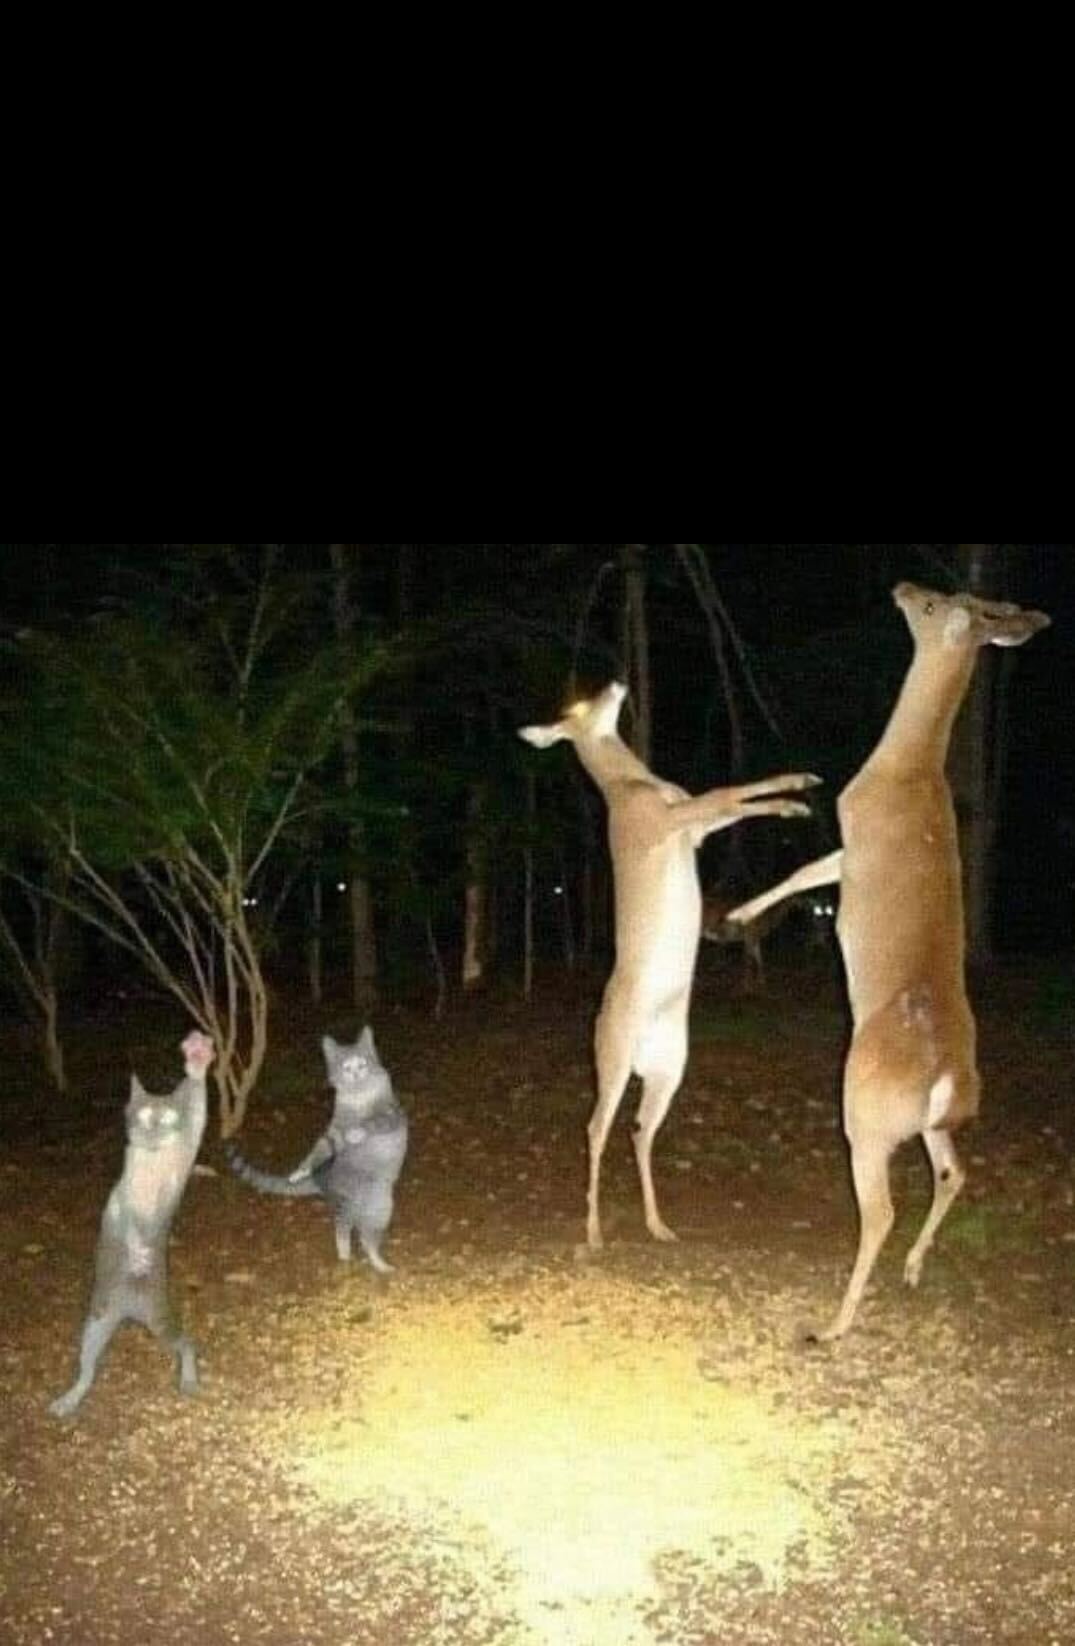 a photograph of a wooded clearing showing two cats standing upright as well as two deer standing upright, all on hind legs. It is night. A bright camera light illuminates their eyes. They look like they are dancing.